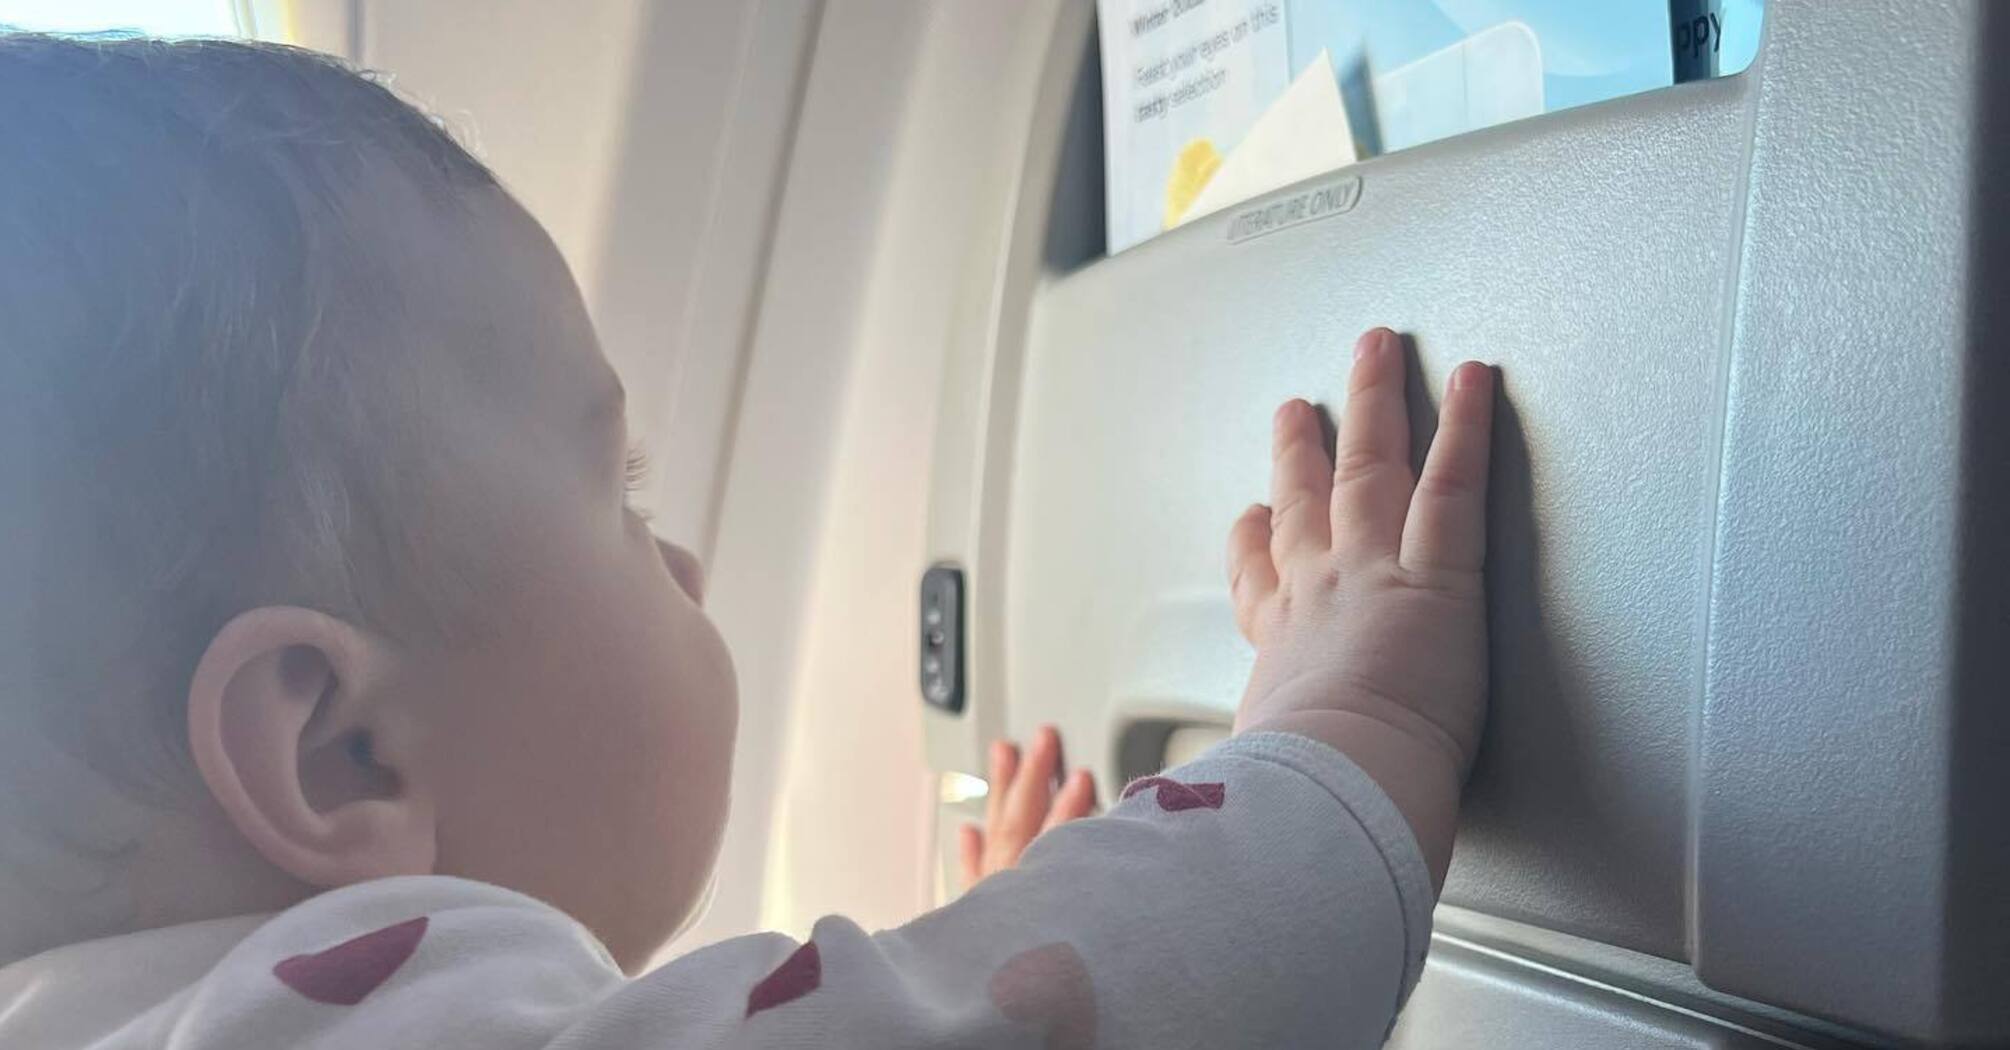 Unexpected consequences: an airplane flight turned into a nightmare due to a rocking baby in the front